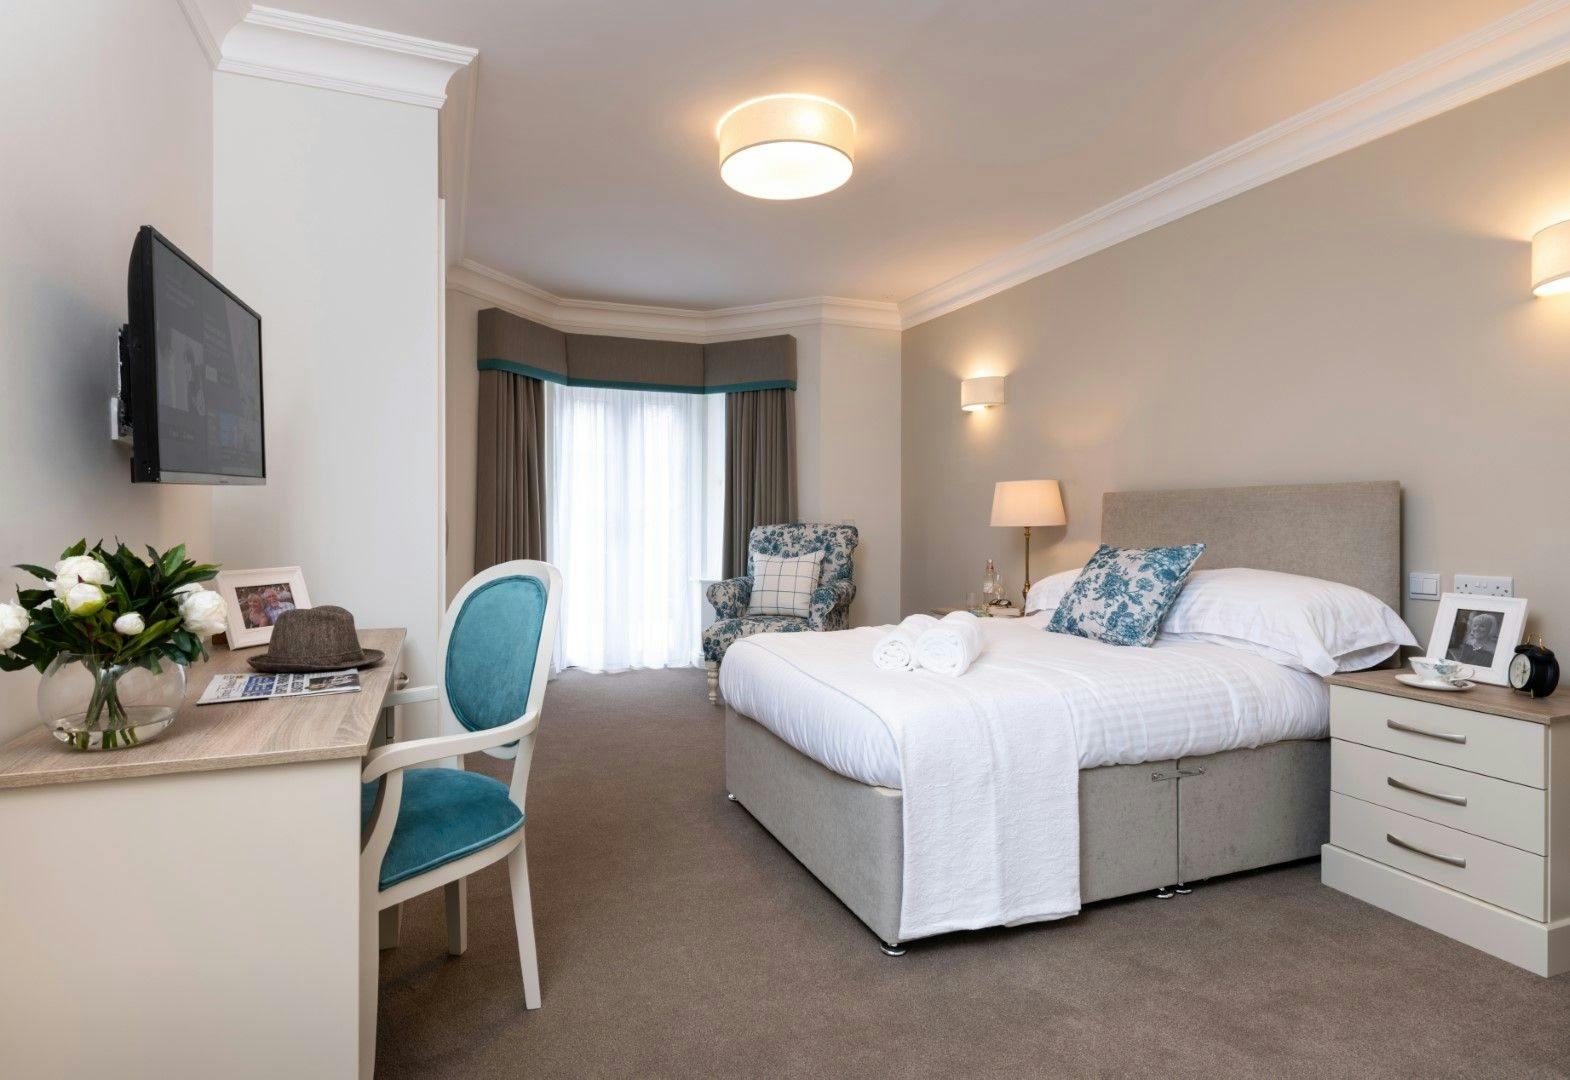 Bedroom at Henley Manor Care Home in Henley-on-Thames, South Oxfordshire